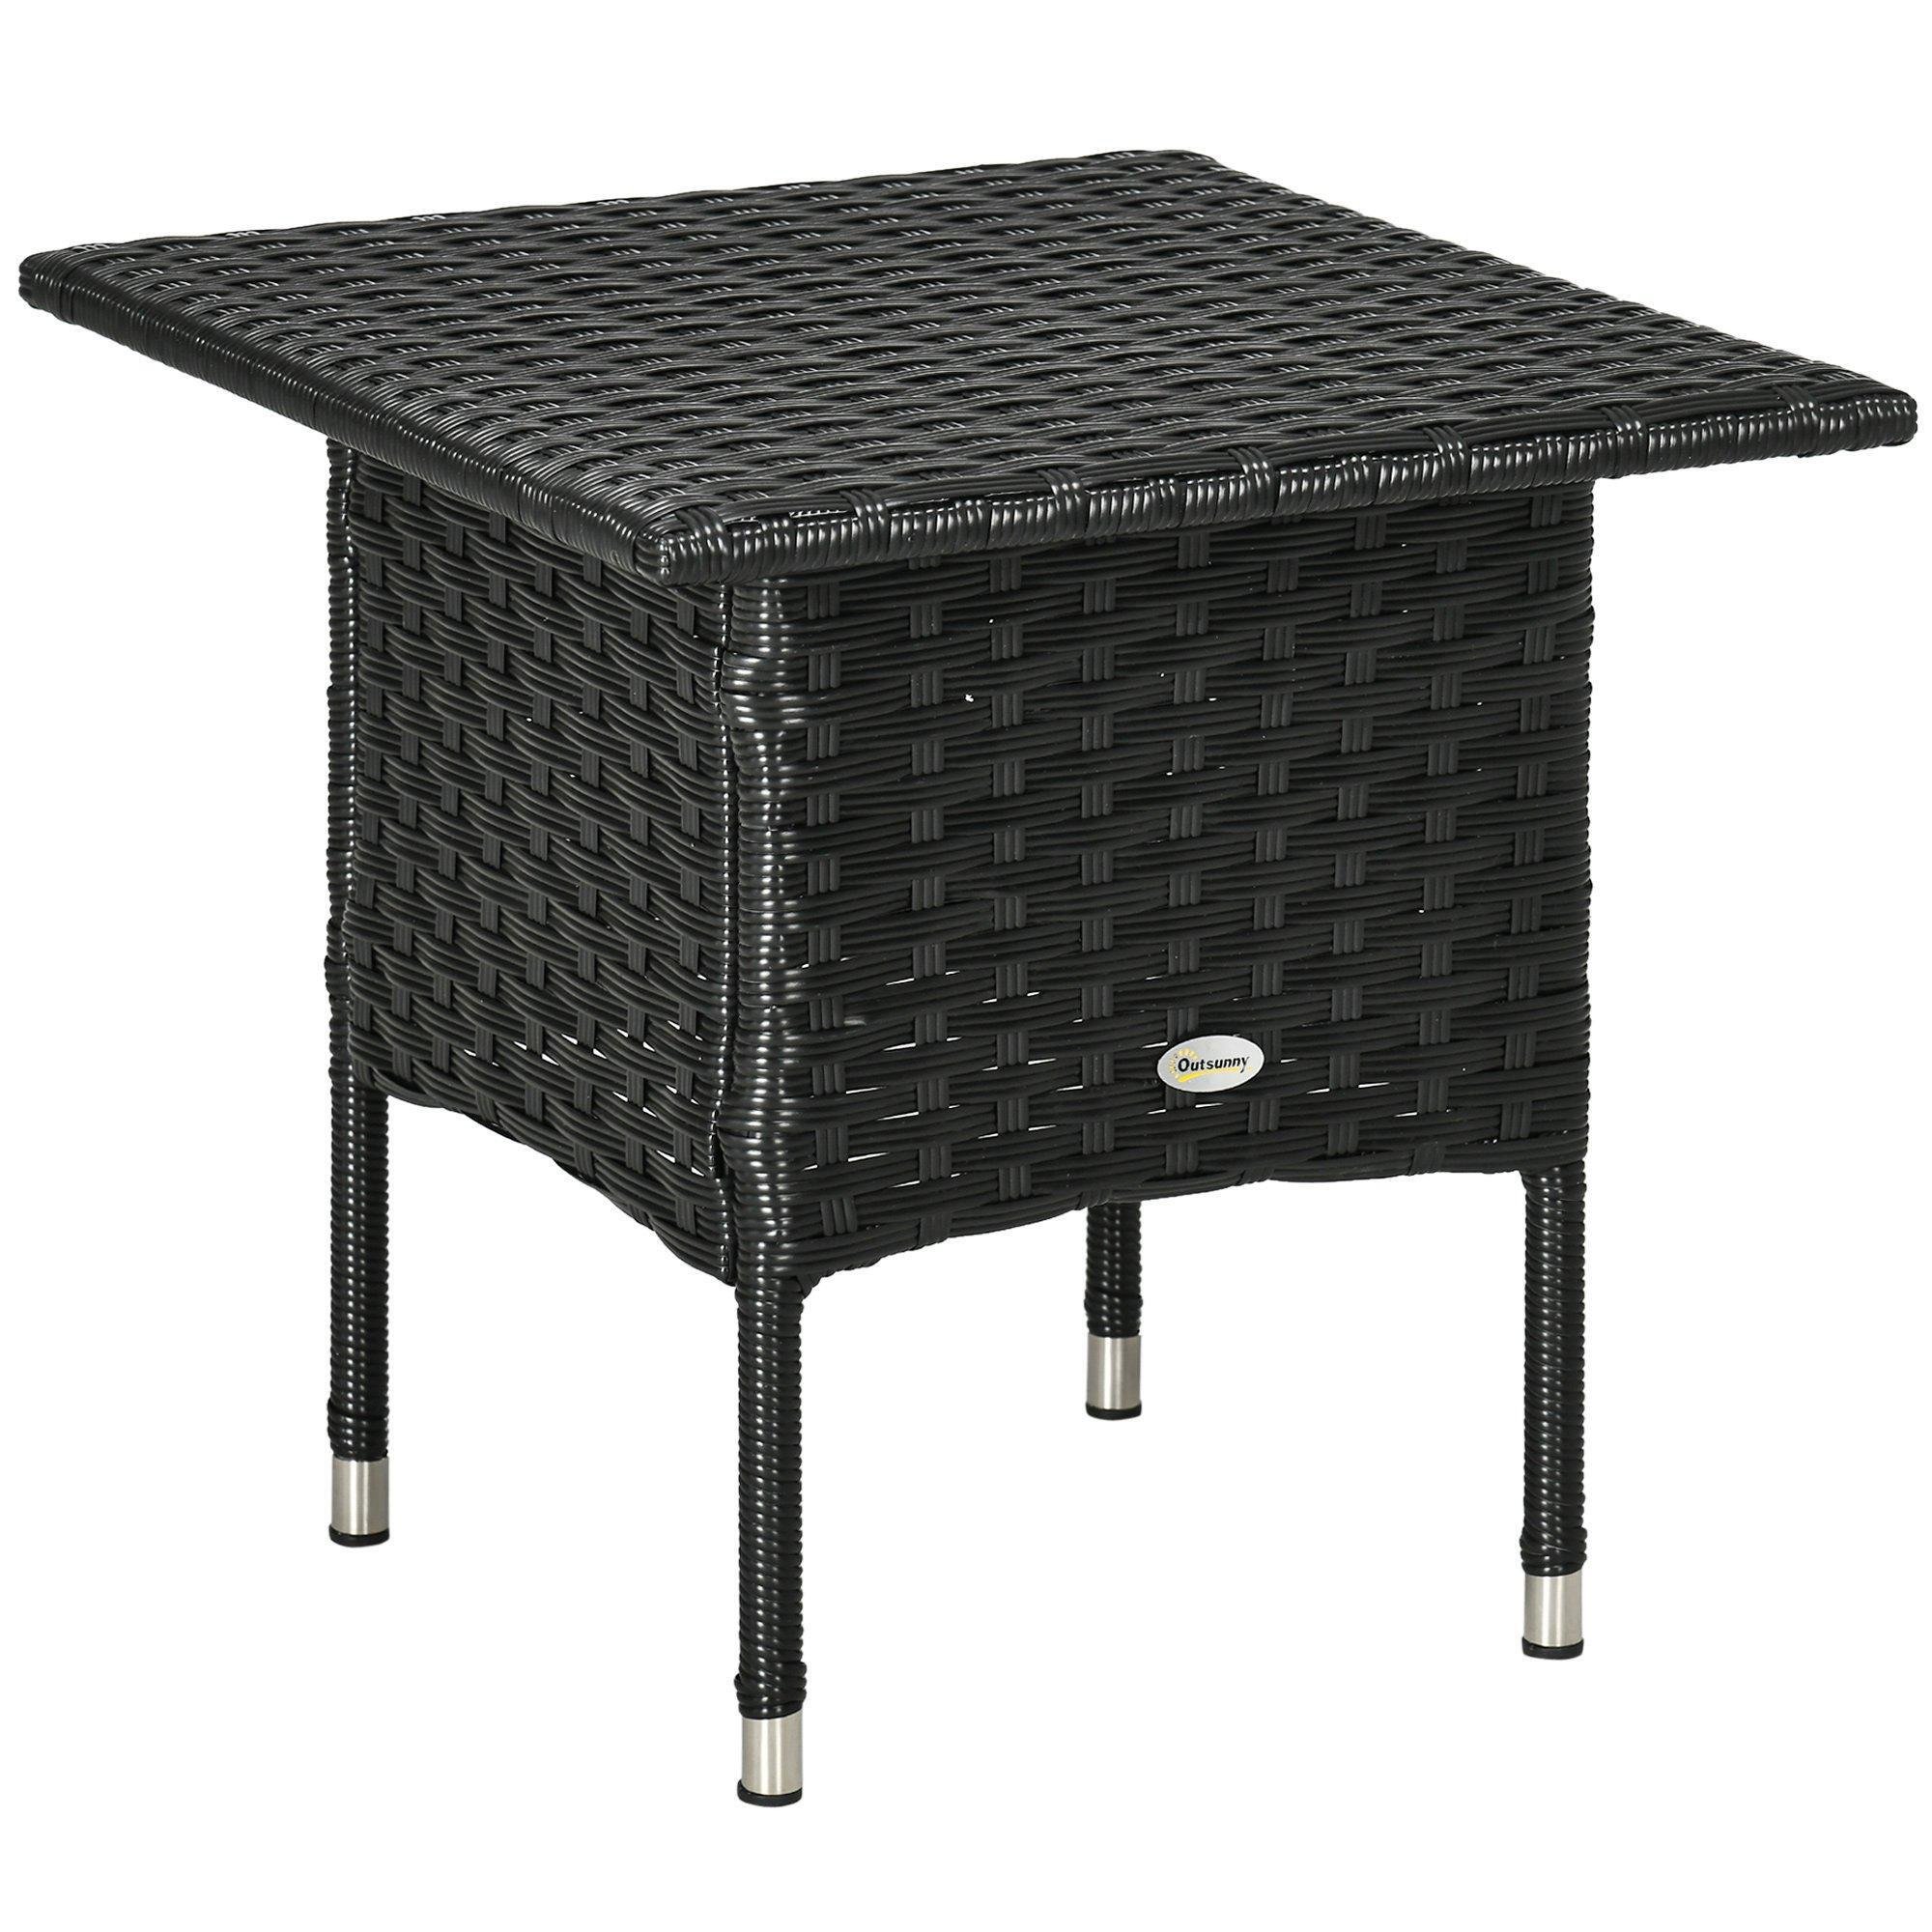 PE Rattan Outdoor Coffee Table, Rattan Side Table for Patio, Garden - image 1